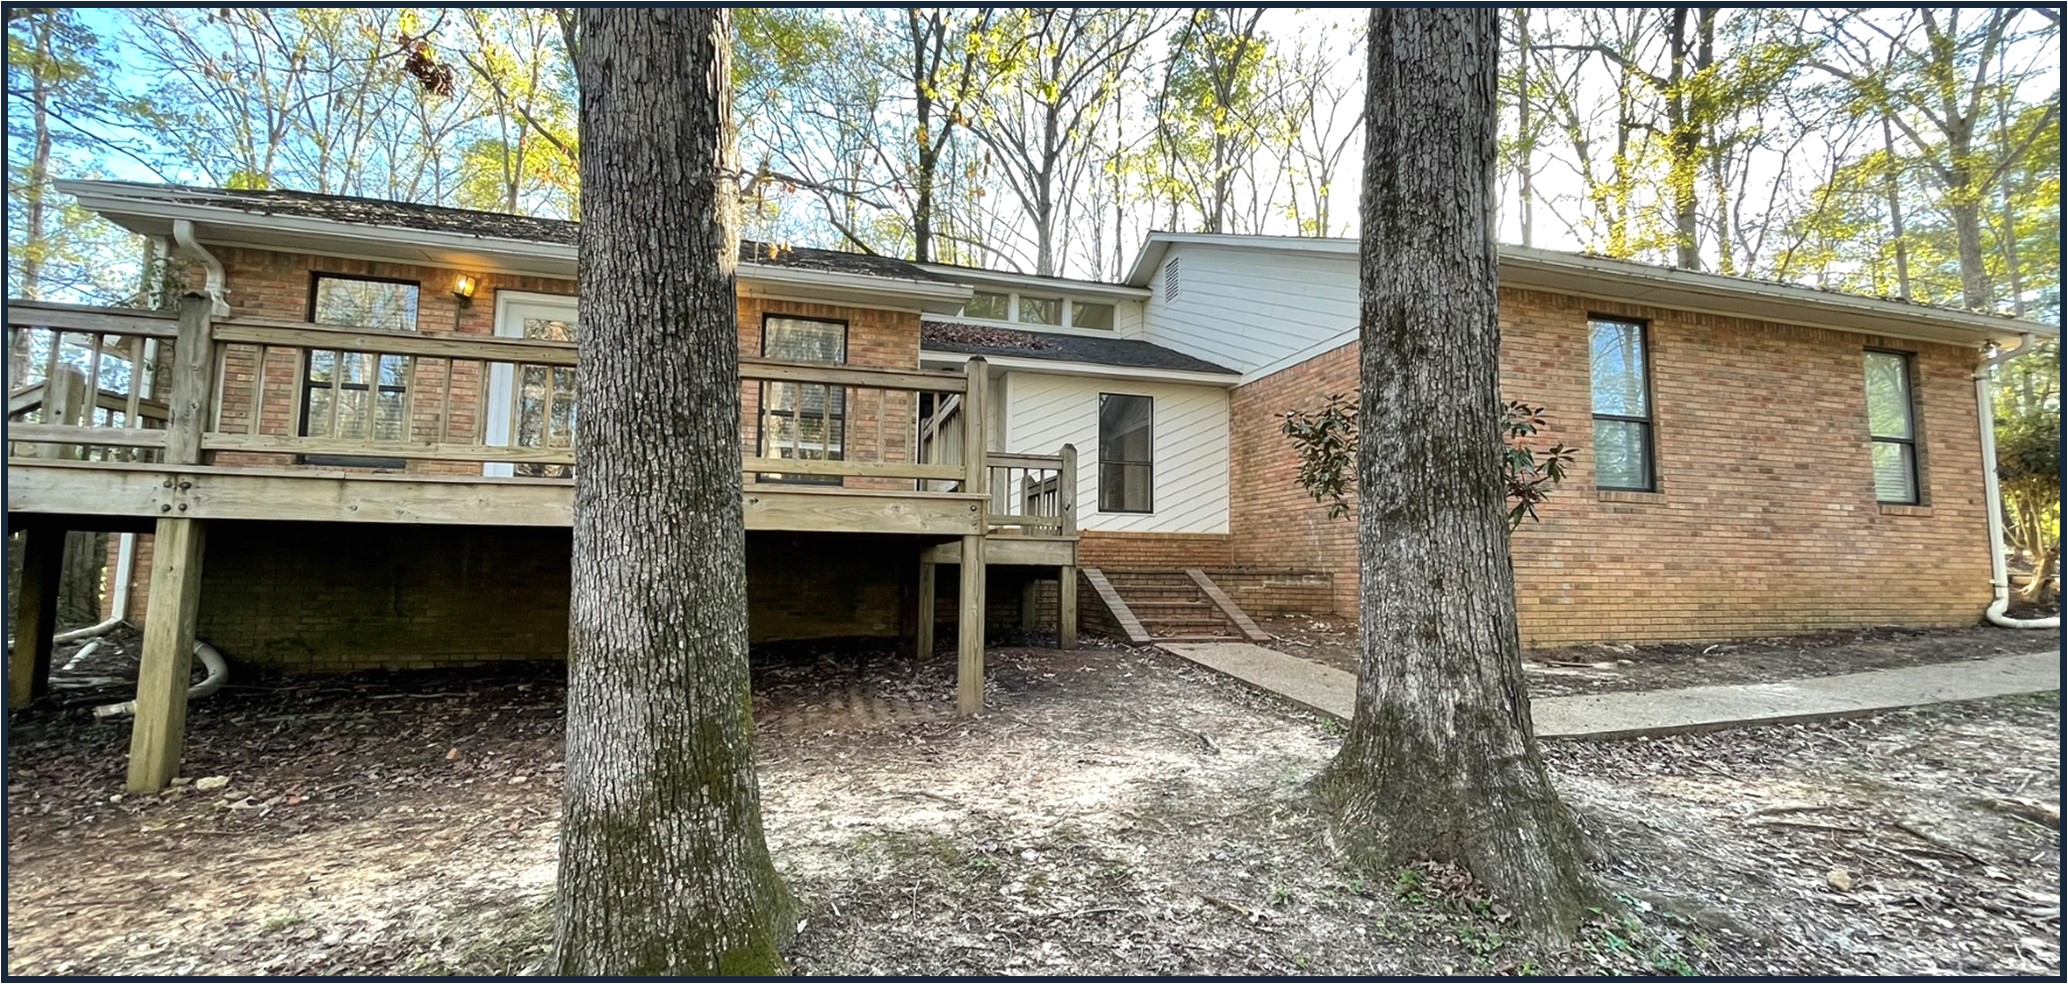 Home in Lauderdale County at 384 Ponta Hills Road in Meridian, MS